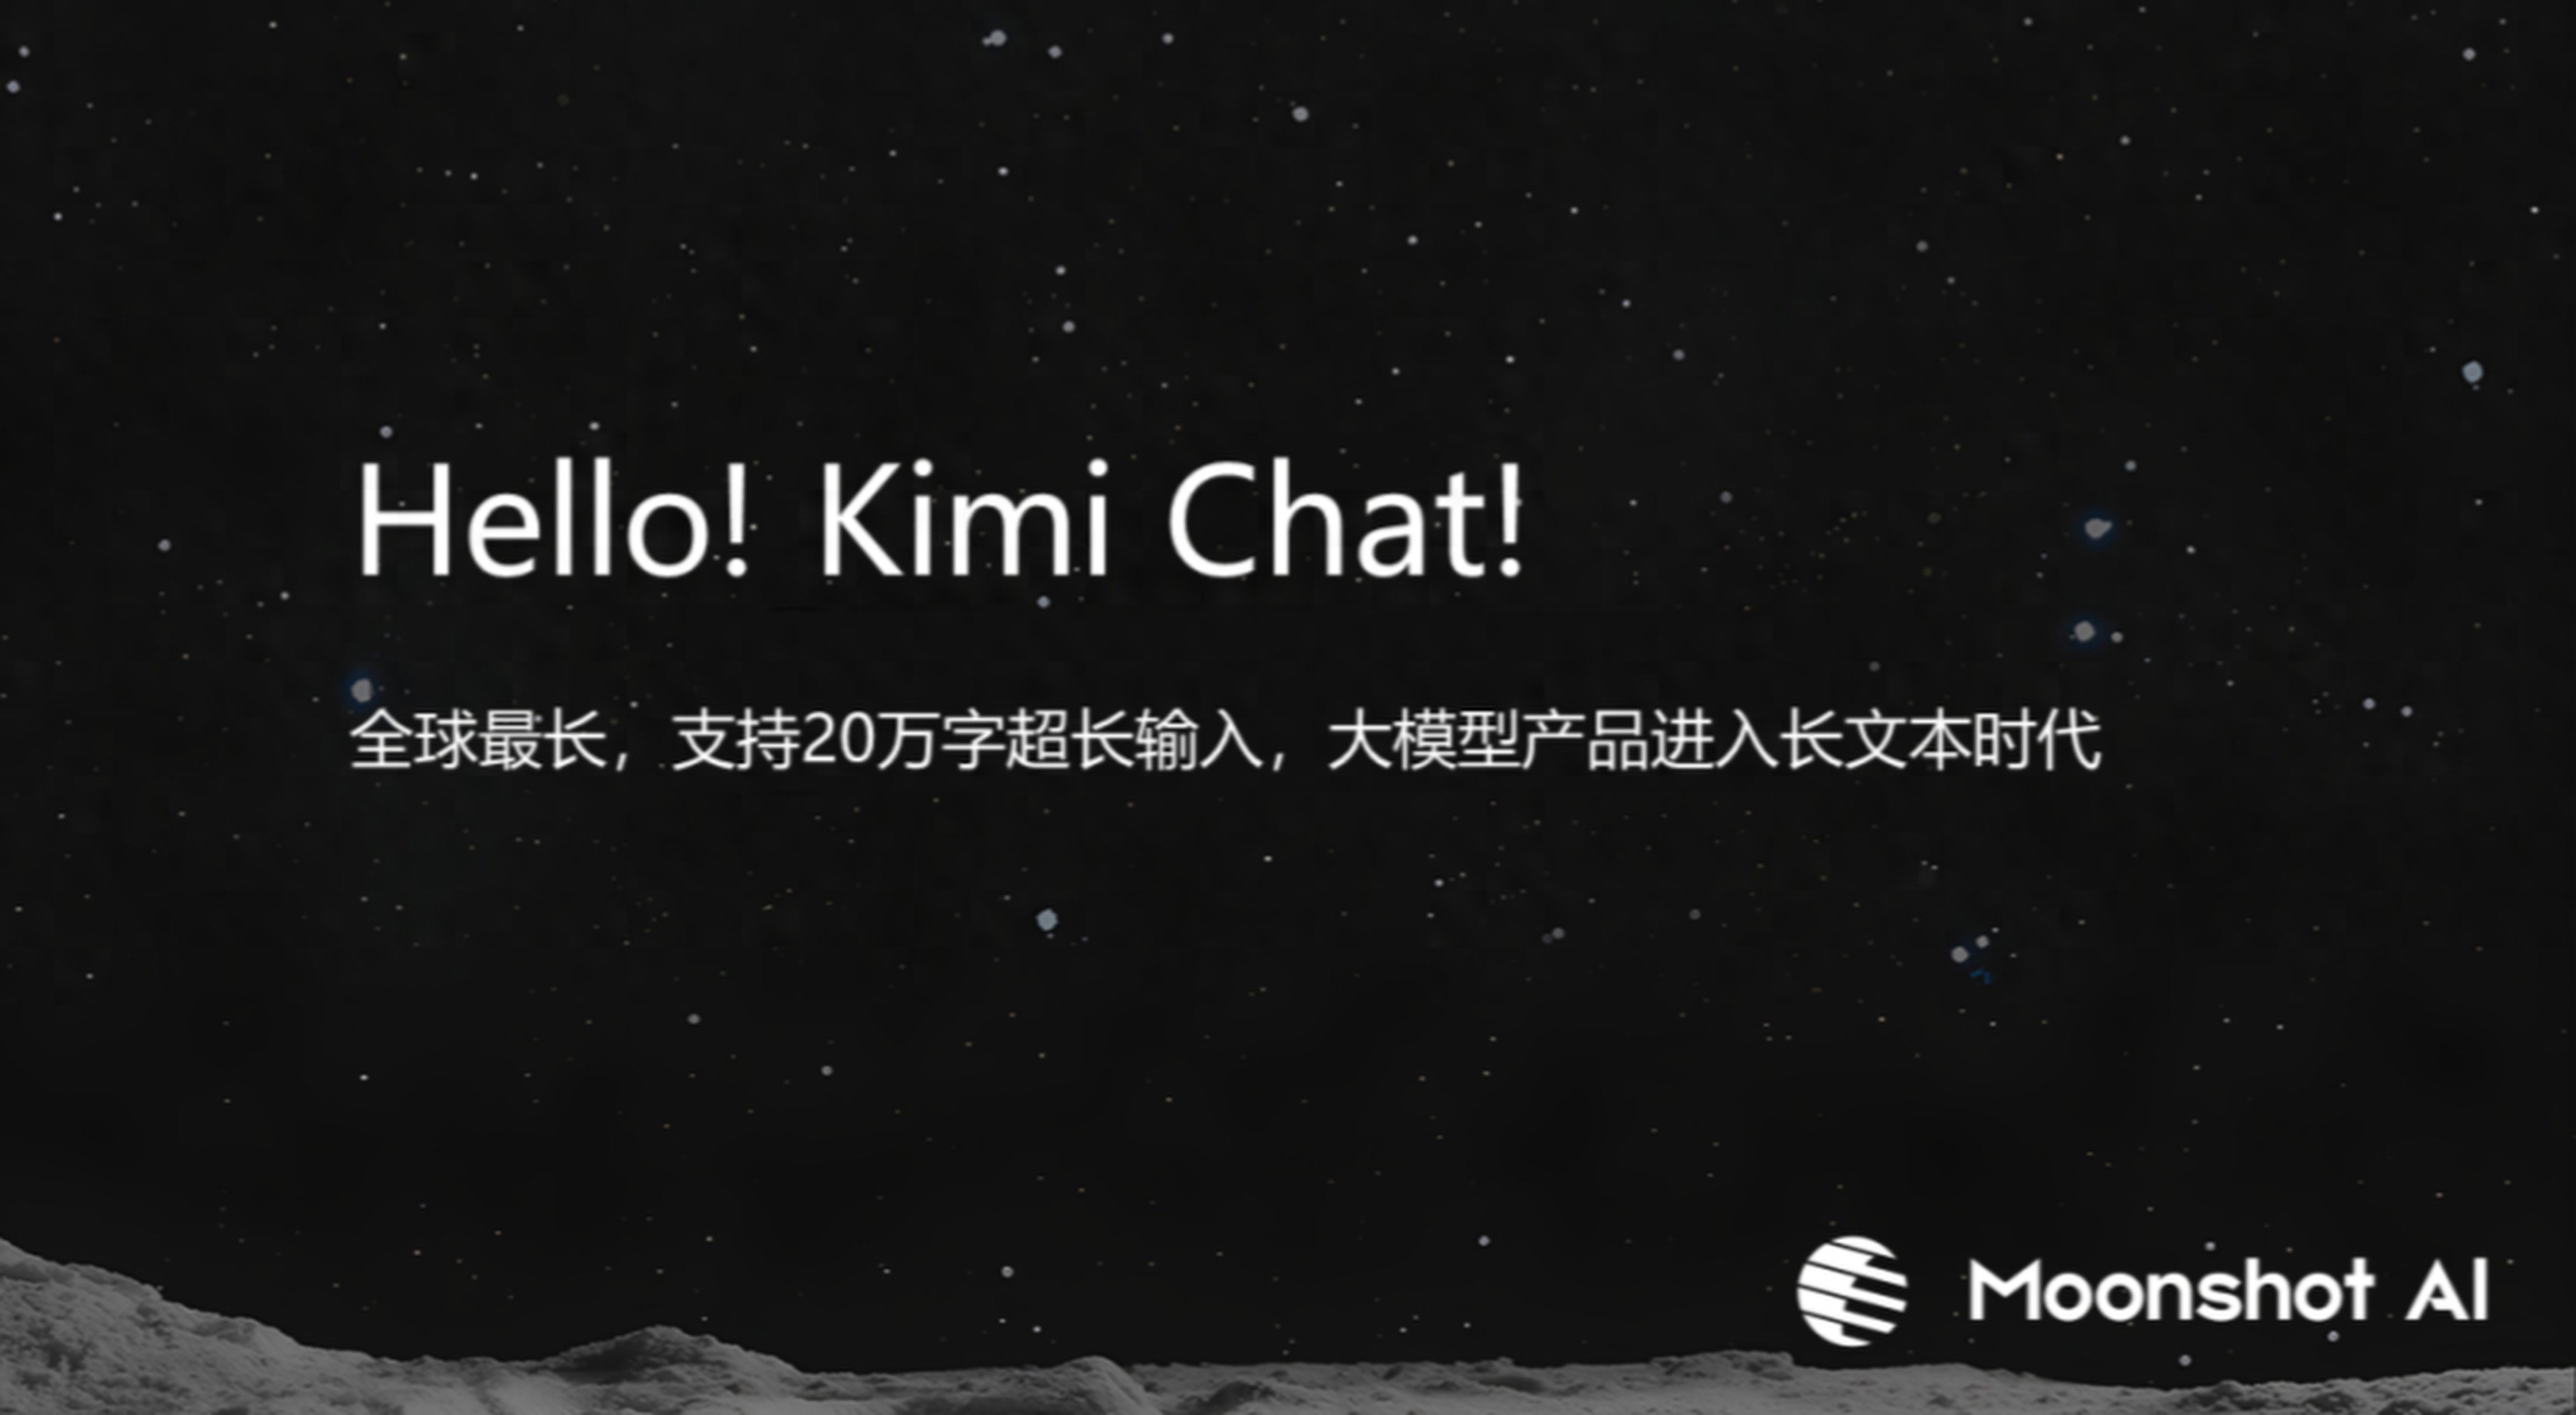 Chinese unicorn Moonshot AI has apologised for a service outage of its chatbot Kimi. Photo: Screenshot